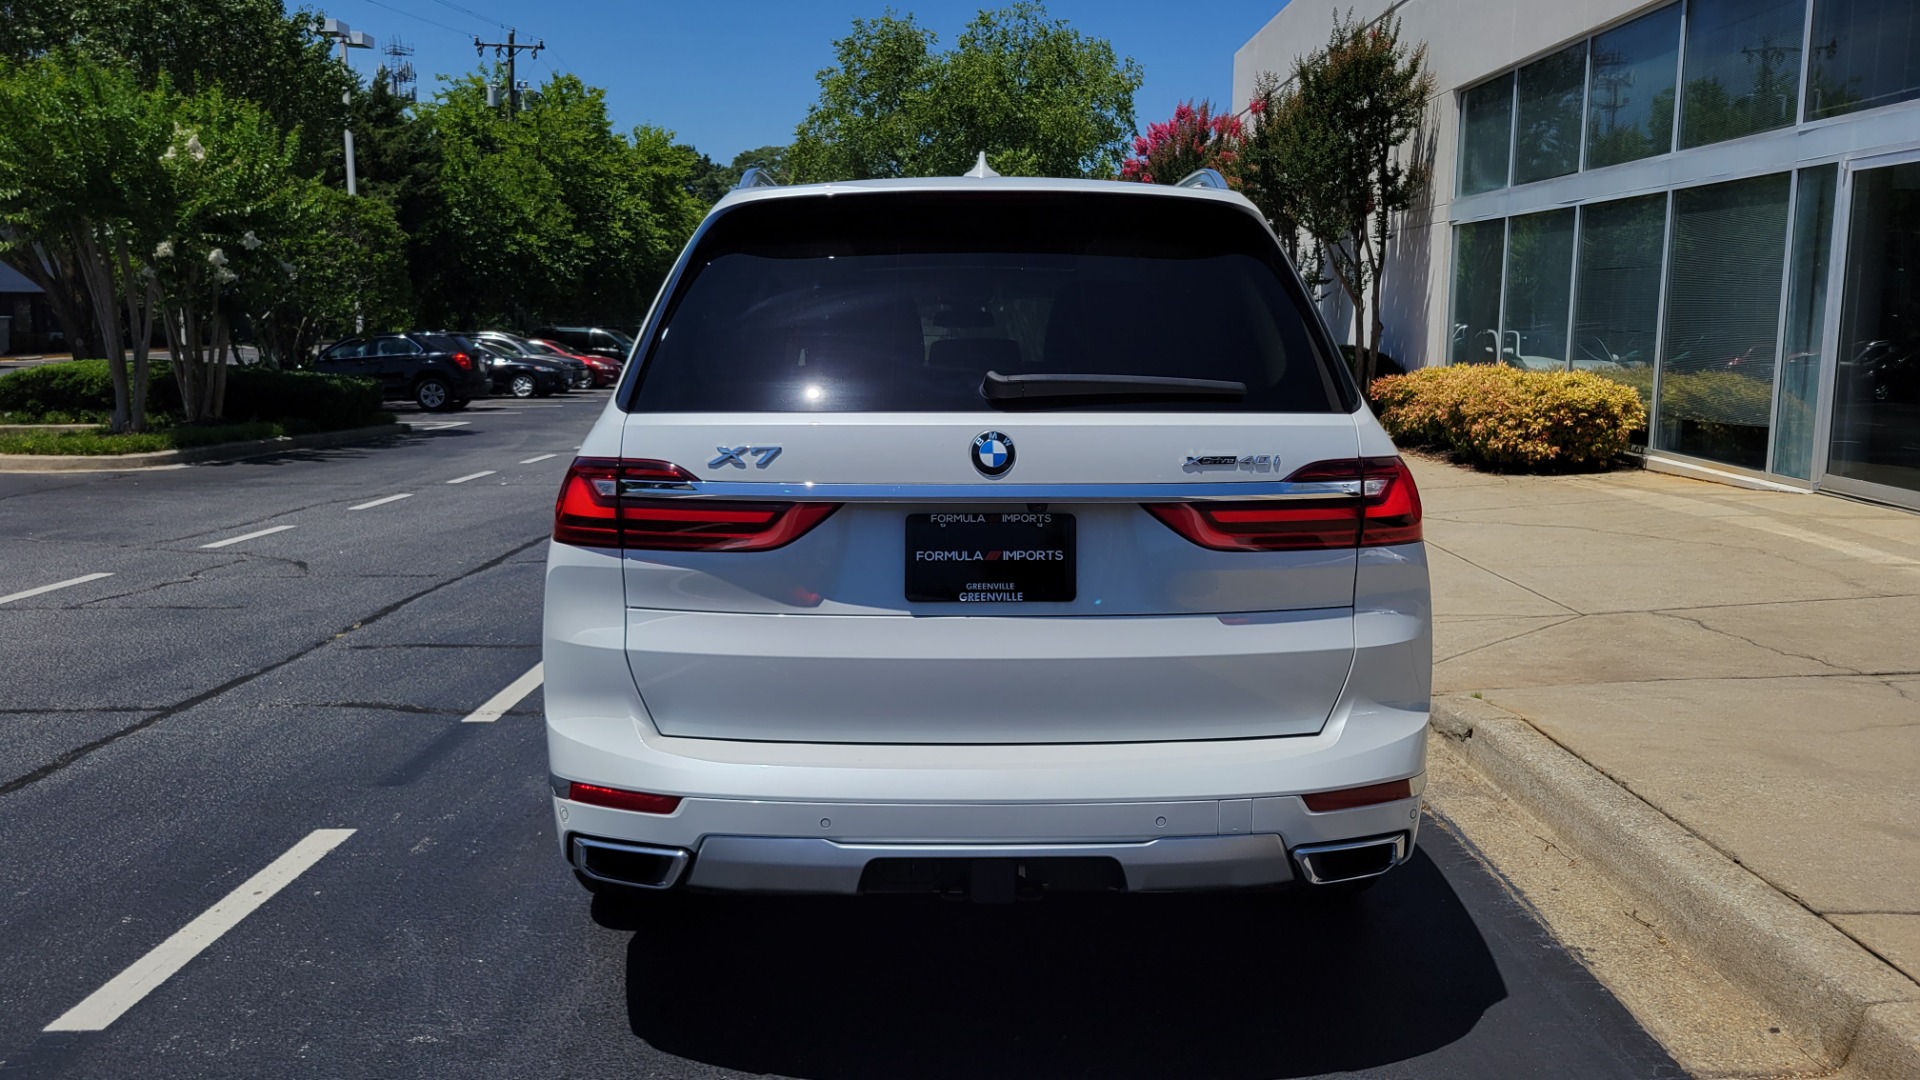 Used 2019 BMW X7 XDRIVE40I PREMIUM / NAV / HUD / PARK ASST PLUS / REMOTE START / 3D VIEW for sale $71,095 at Formula Imports in Charlotte NC 28227 9